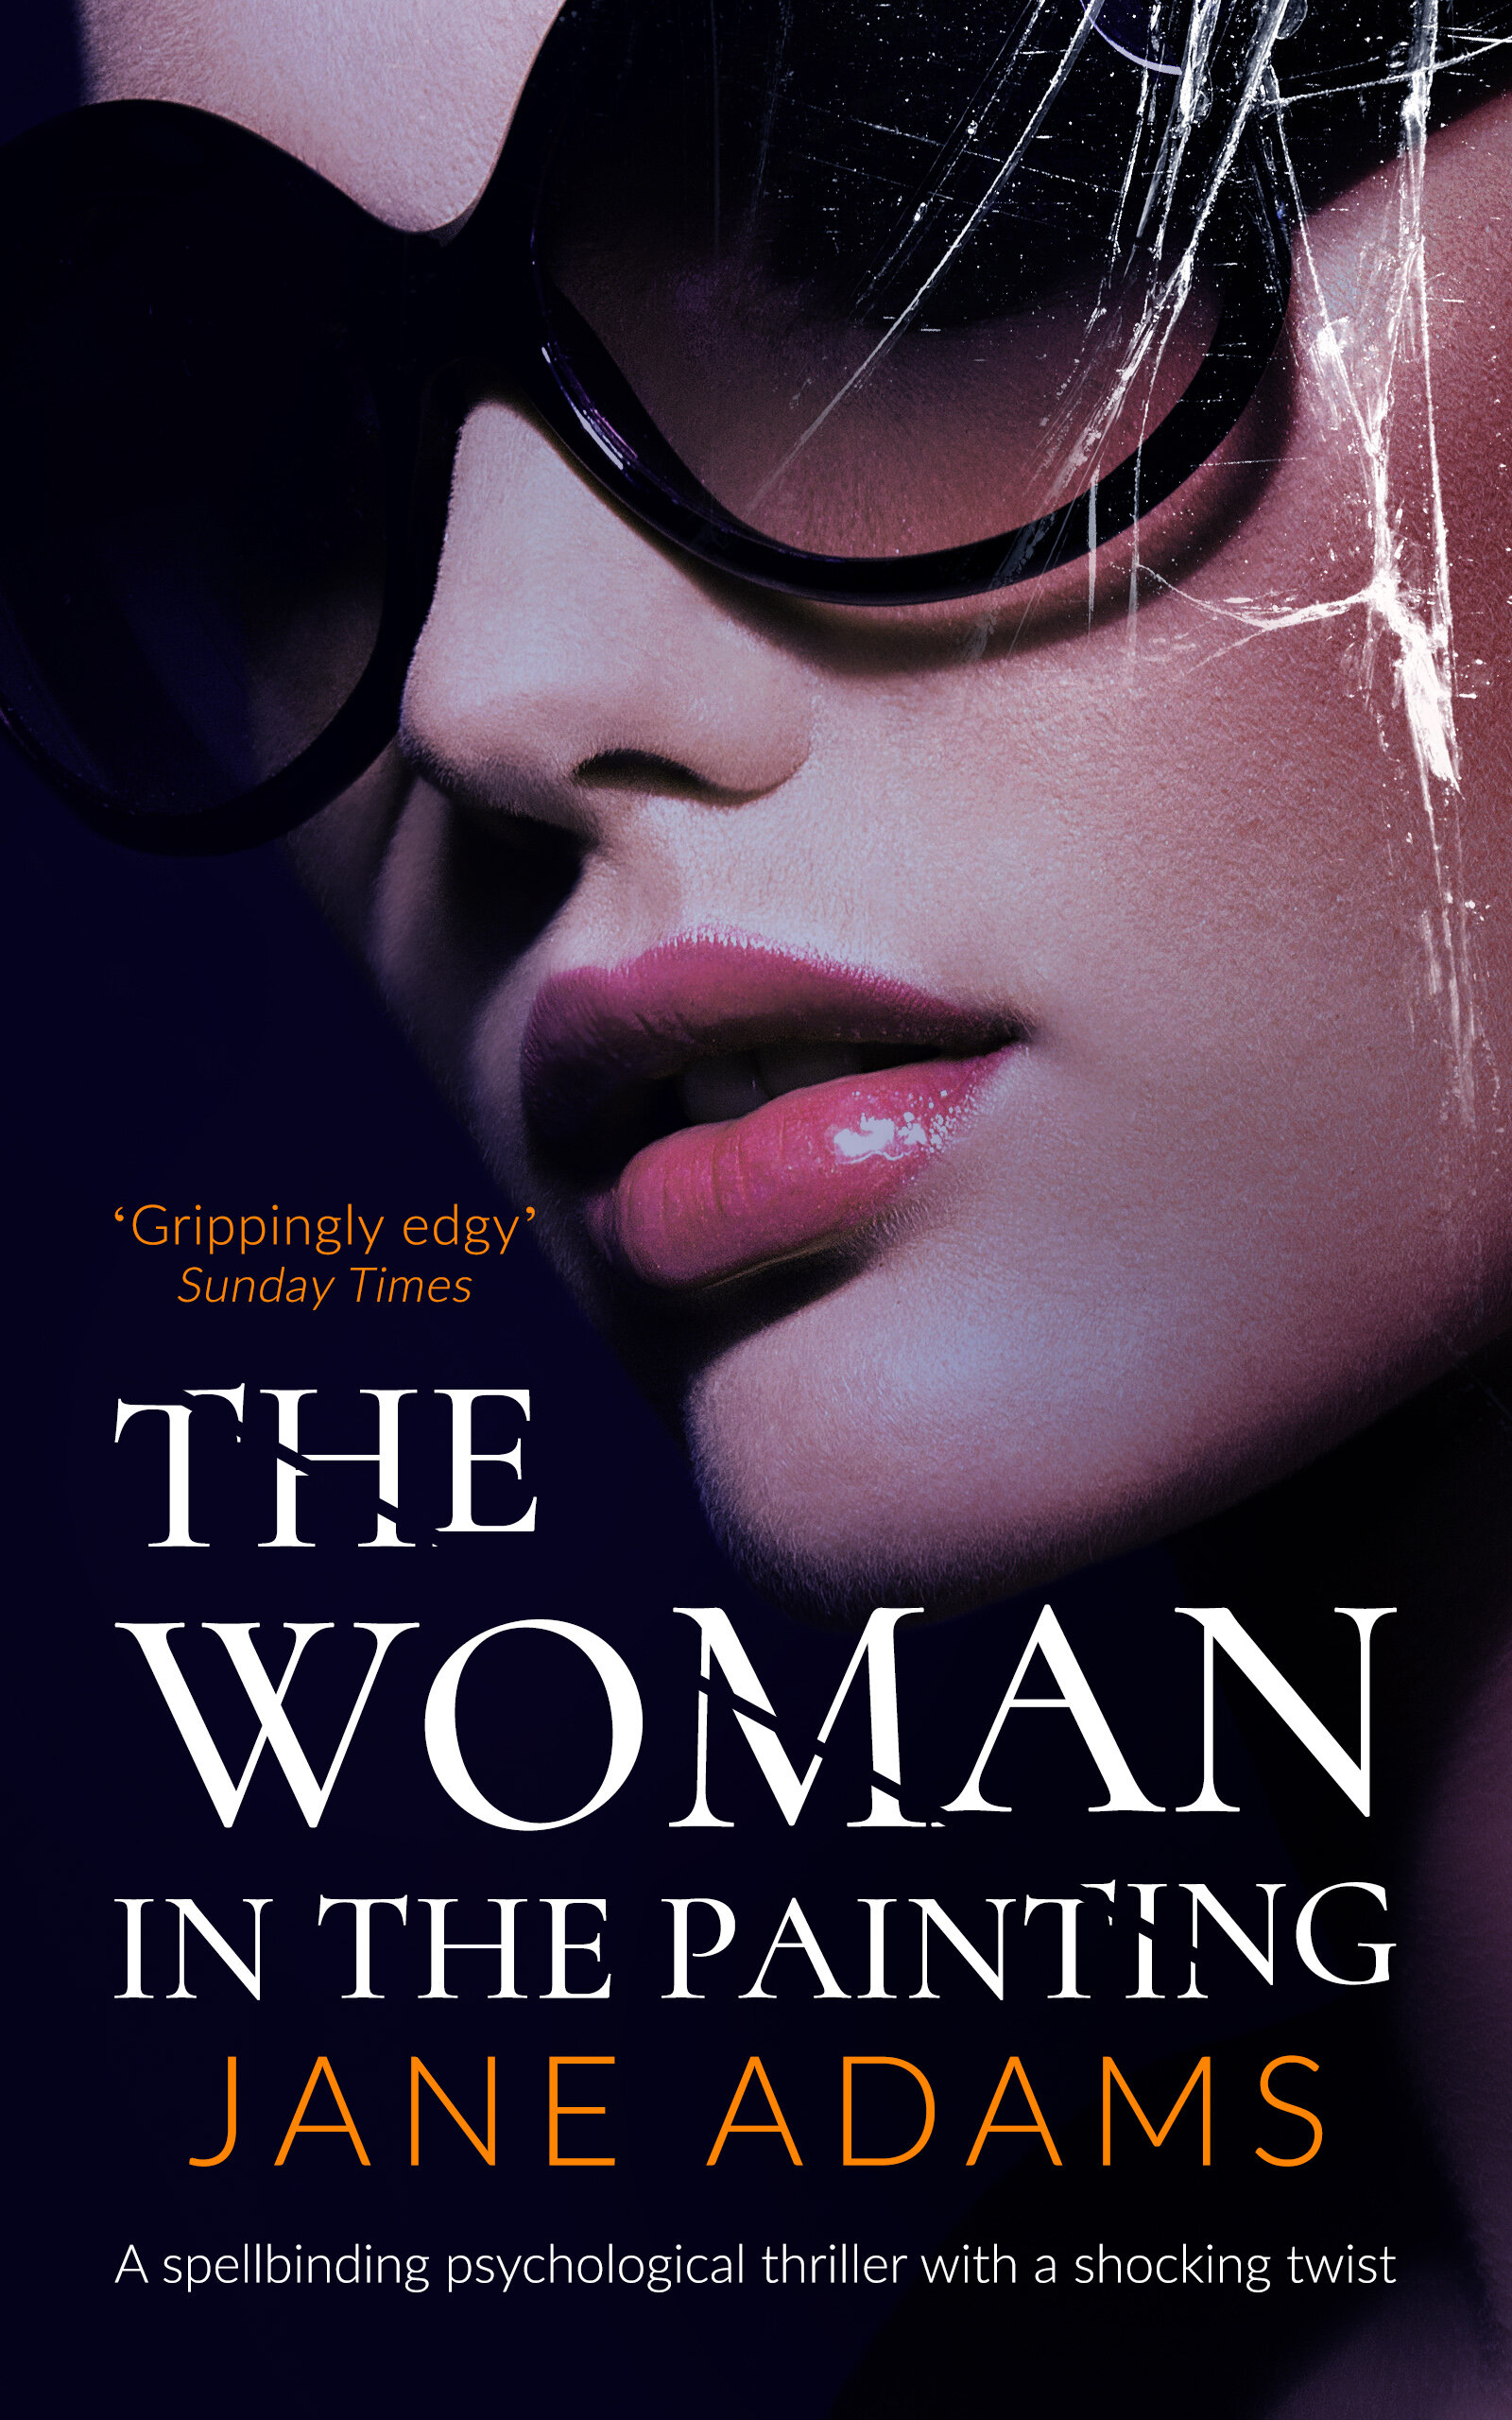 THE WOMAN IN THE PAINTING cover.jpg